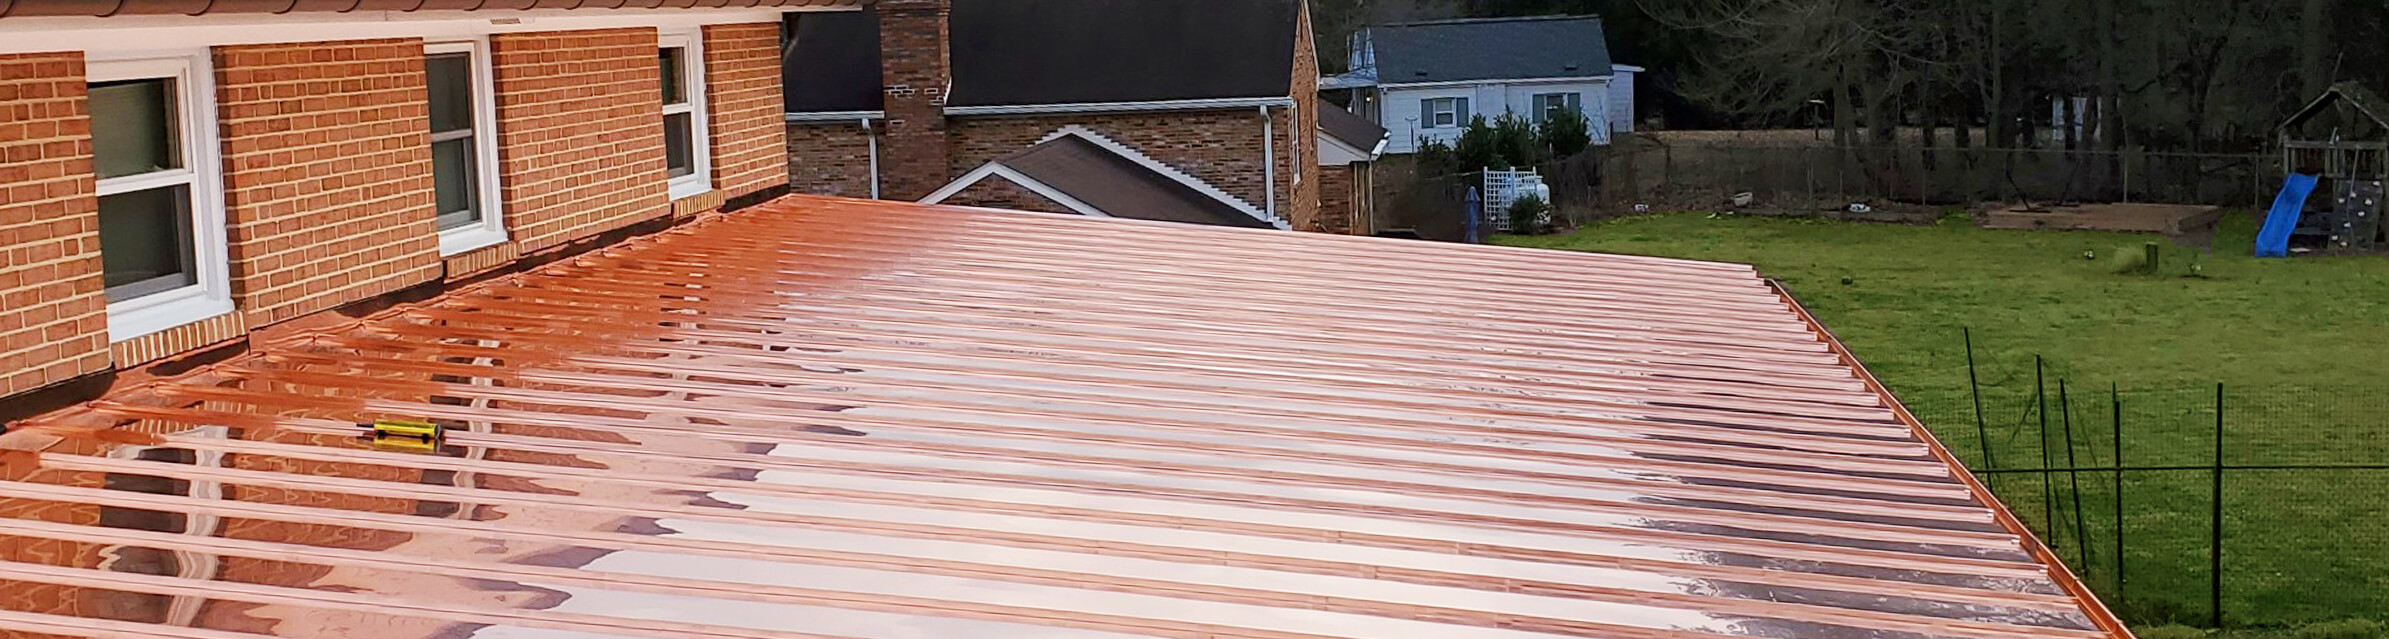 view from roof of residential home that has a brand new copper roof